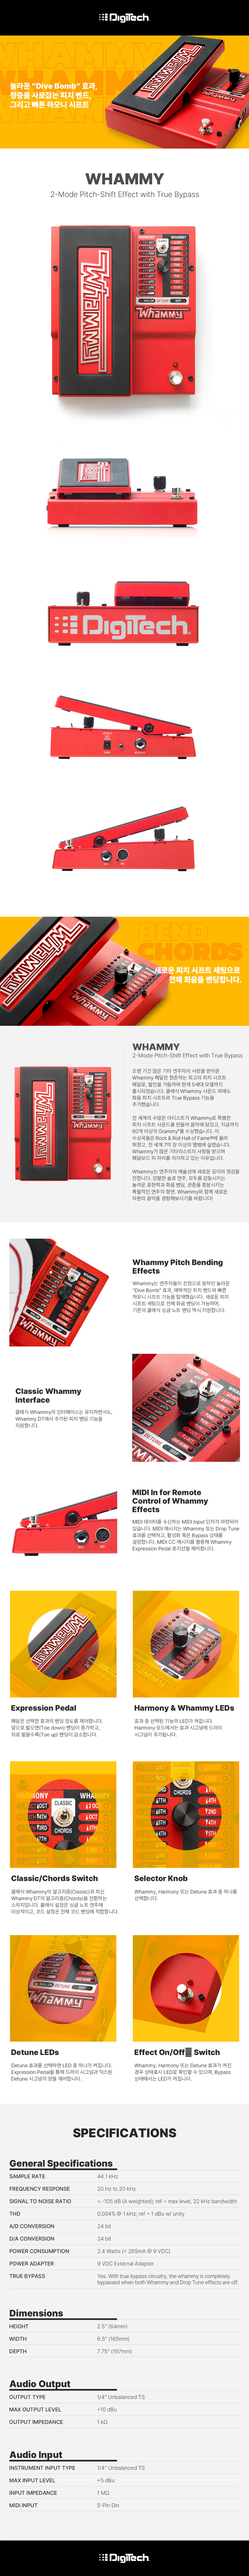 WhammyV-Product-page-1200px_160932.jpg